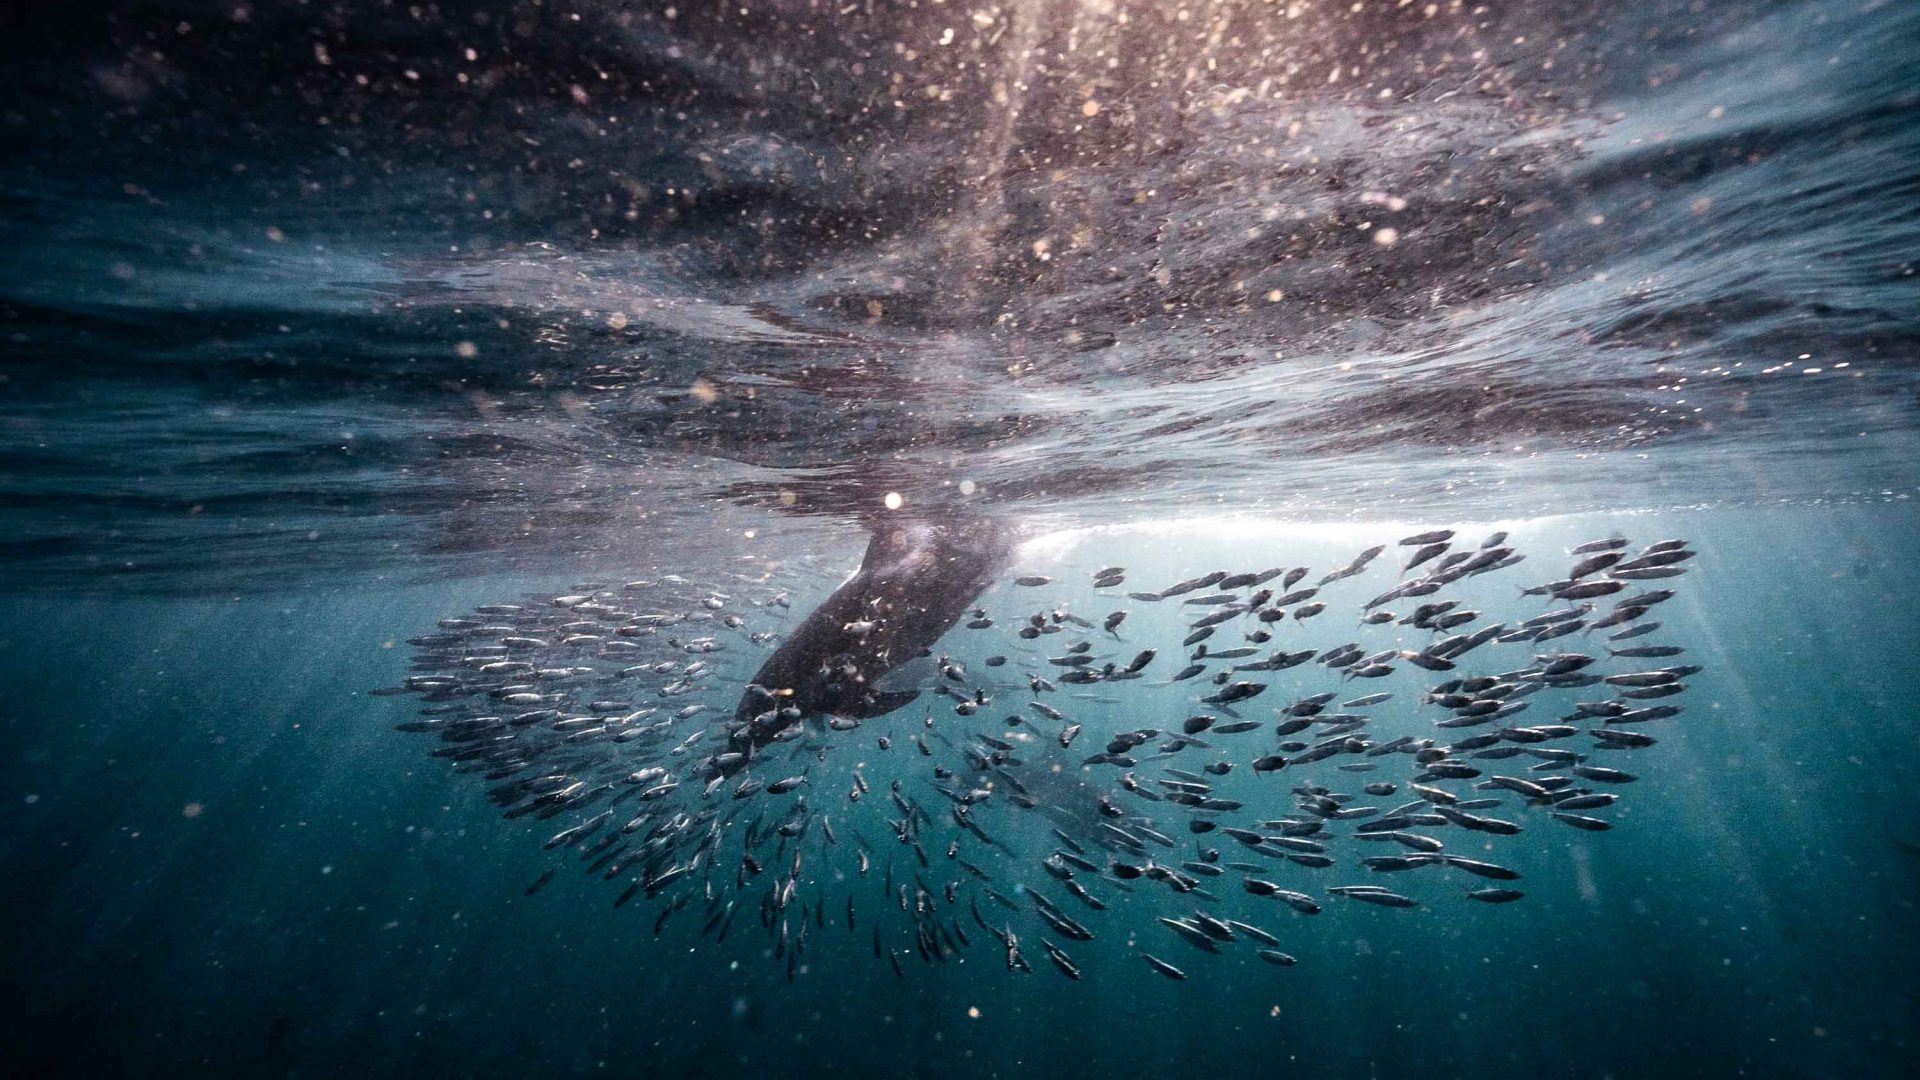 In South Africa, a monumental sardine migration draws throngs of divers—but leaves locals in the cold